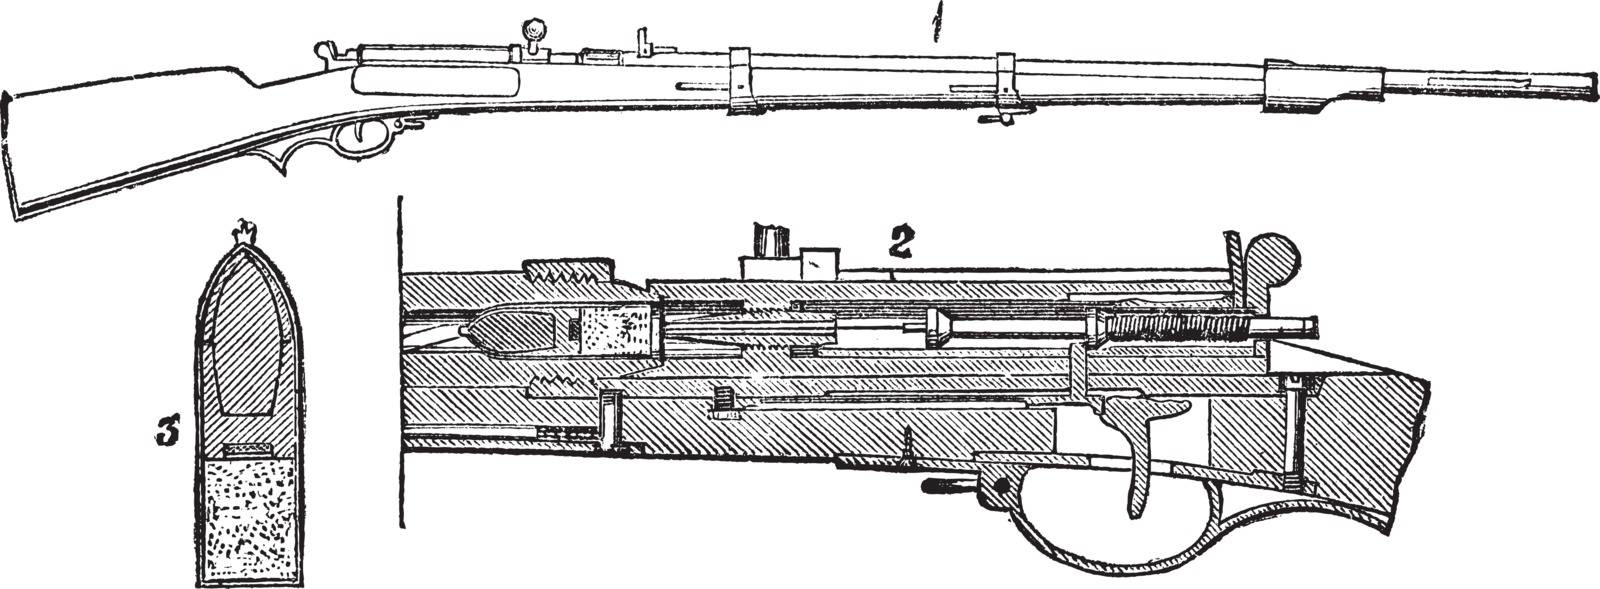 Prussian needle- rifle, vintage engraving.  Old engraved illustration of Prussian needle- rifle (1) with inner section (2) and cartridge (3) isolated on a white background.